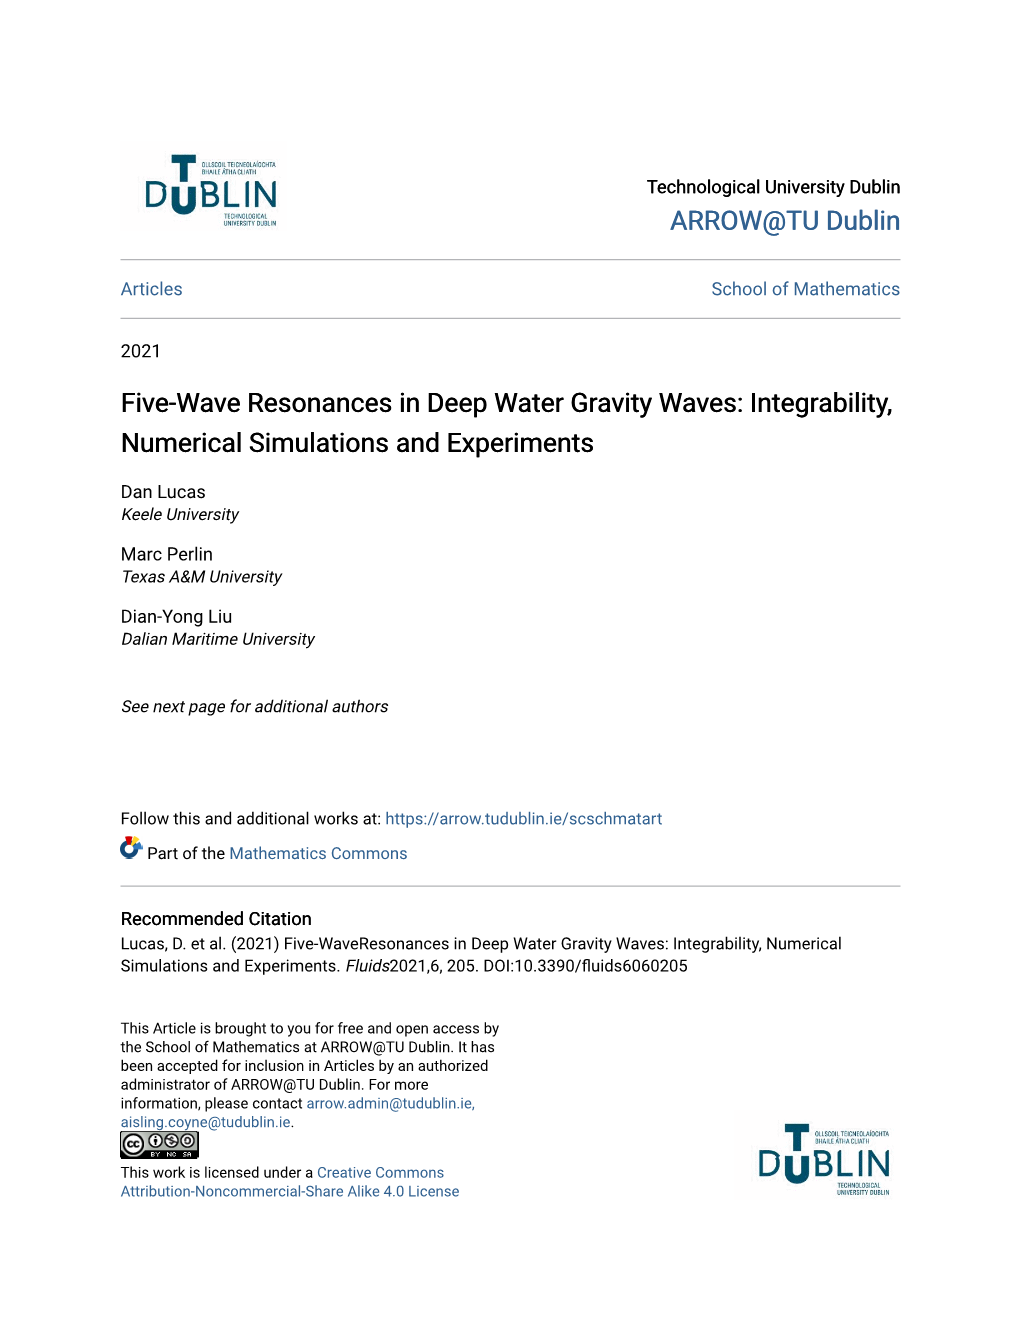 Five-Wave Resonances in Deep Water Gravity Waves: Integrability, Numerical Simulations and Experiments